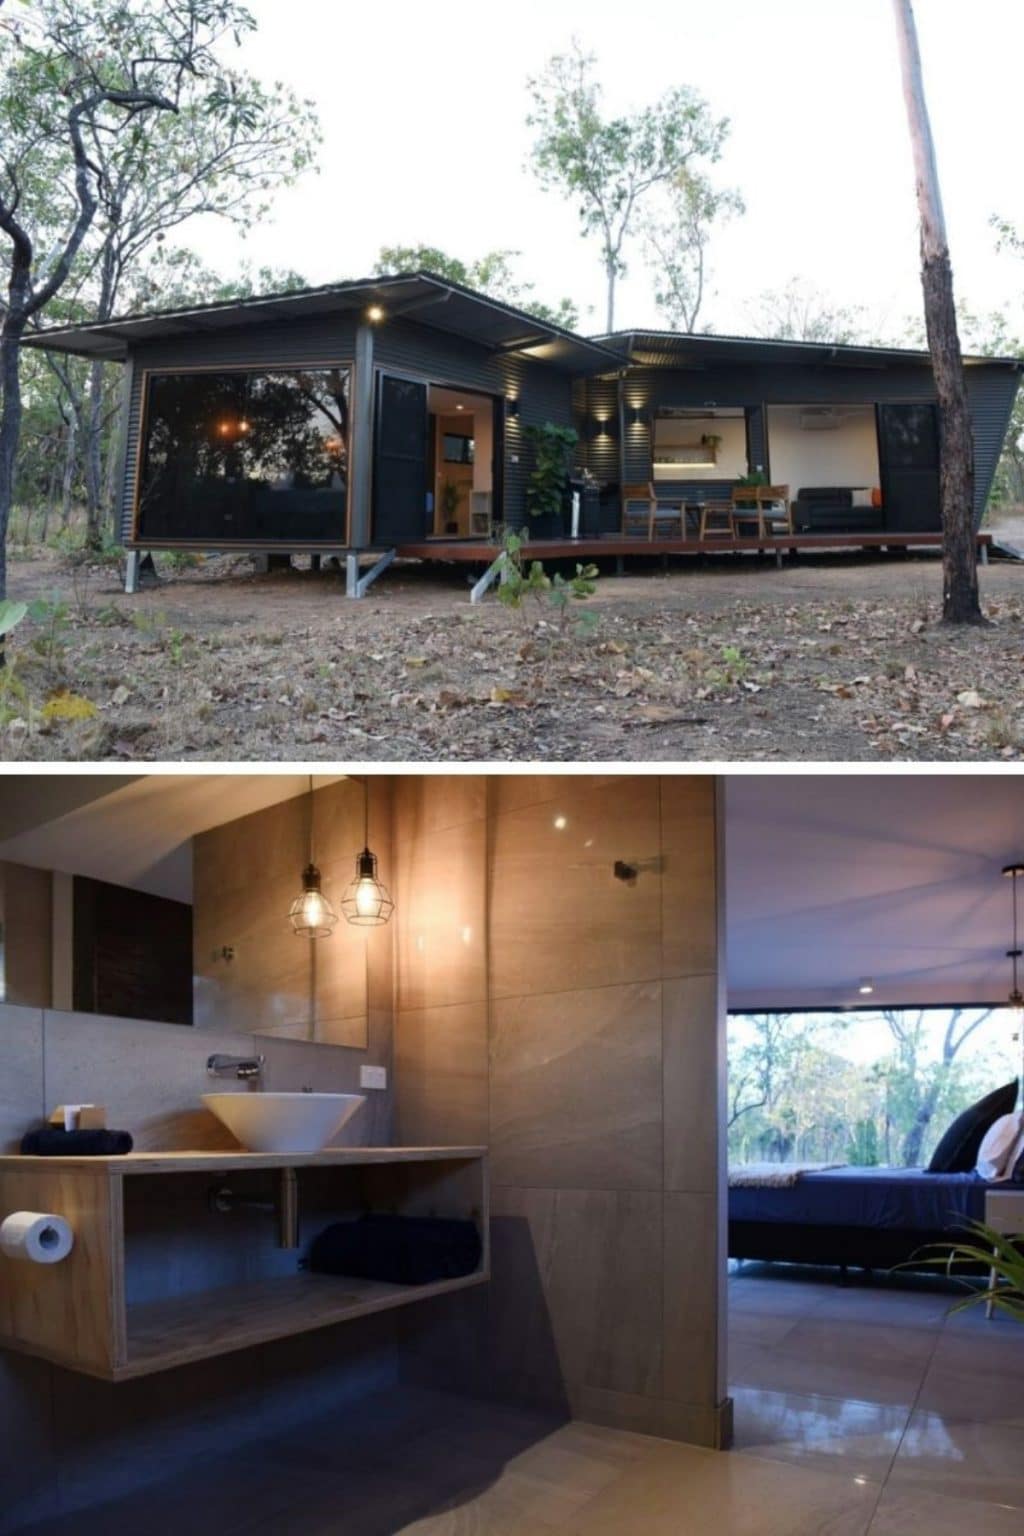 40 Gorgeous Shipping Container Tiny Houses - Tiny Houses